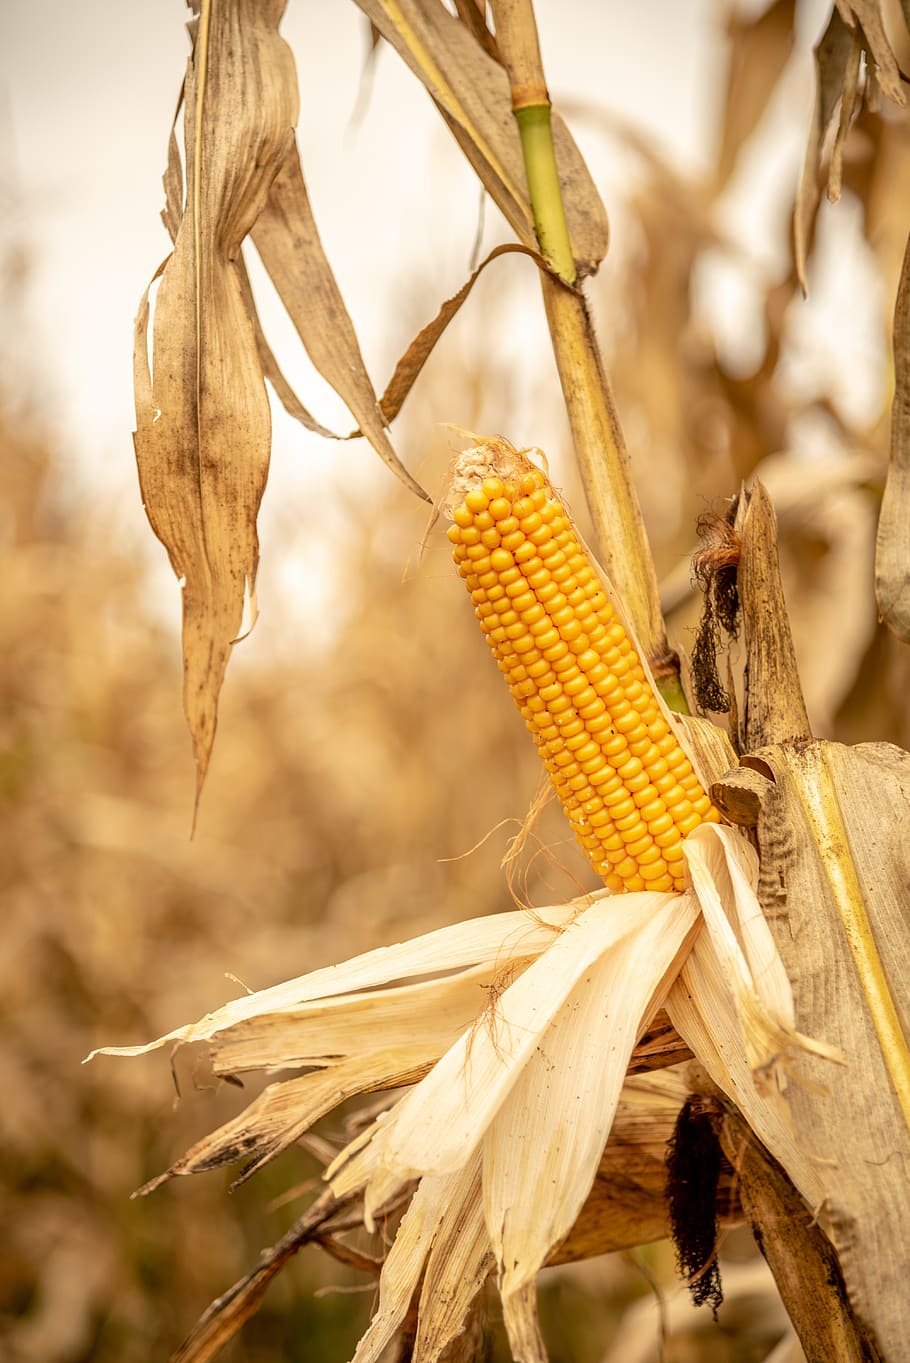 corn, ripe, yellow, crop, close-up, plant, focus on foreground, nature, day, growth